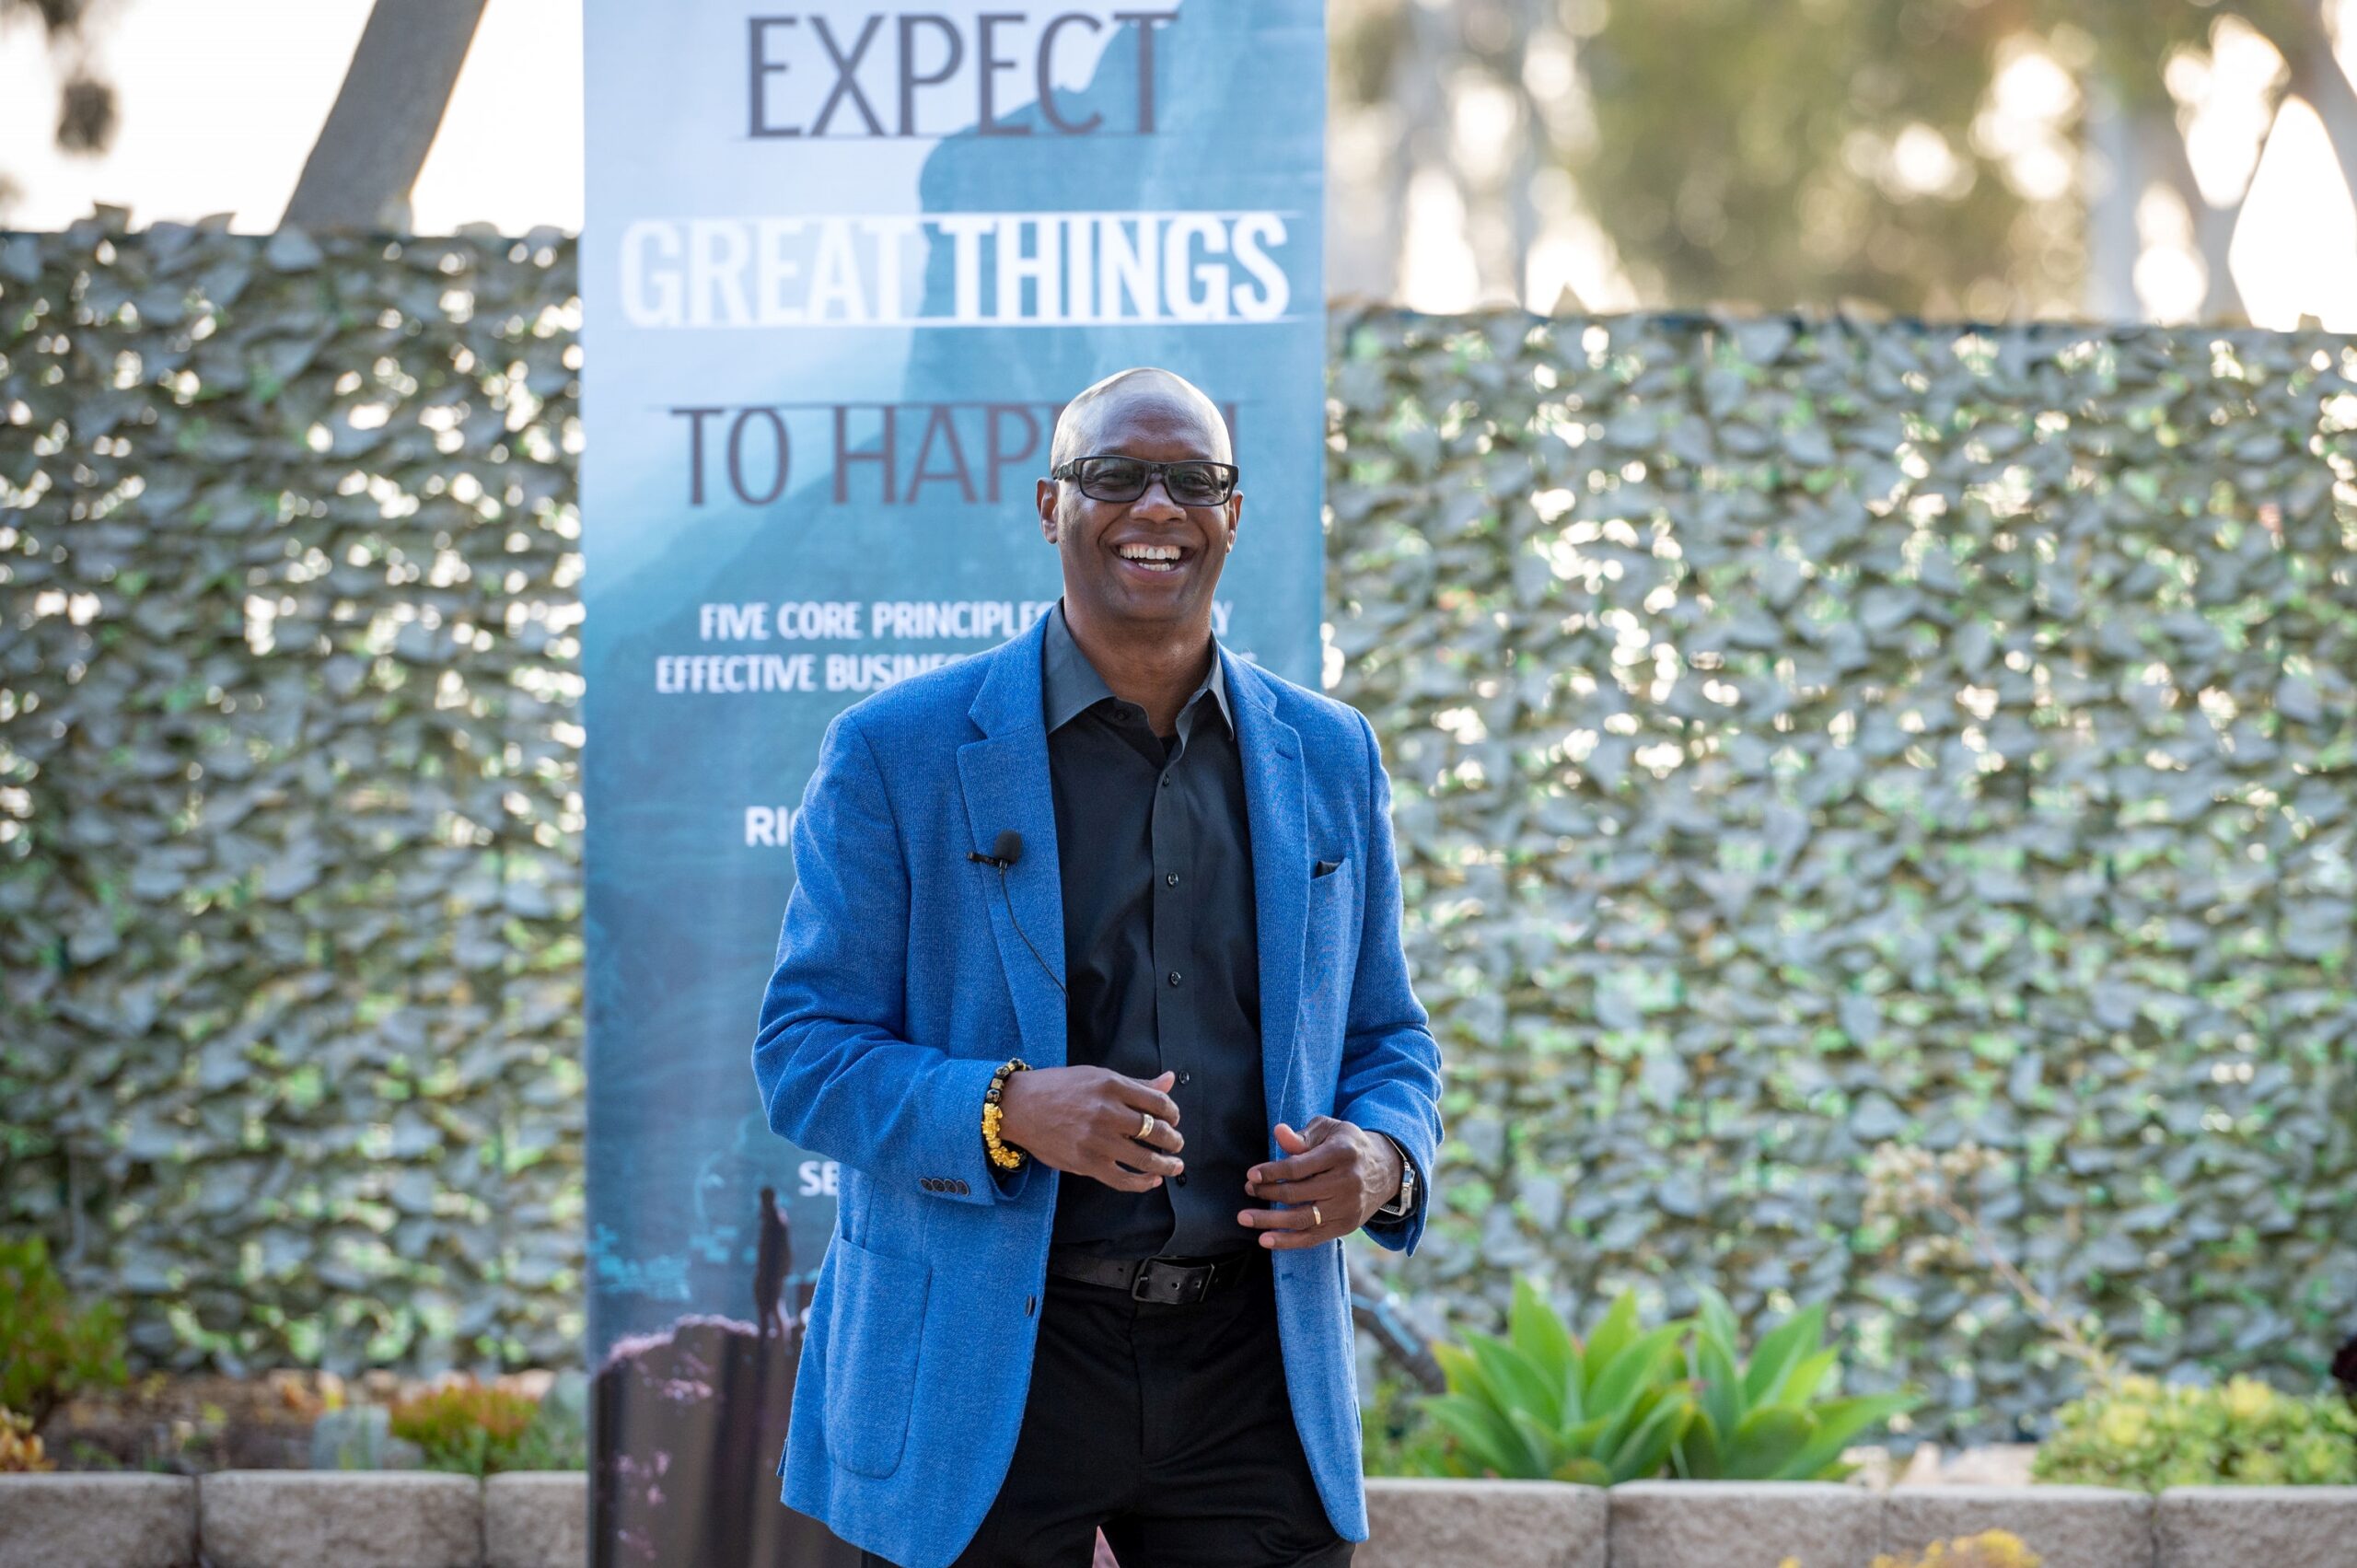 Richard Marks – Expect Great Things To Happen Launch Party